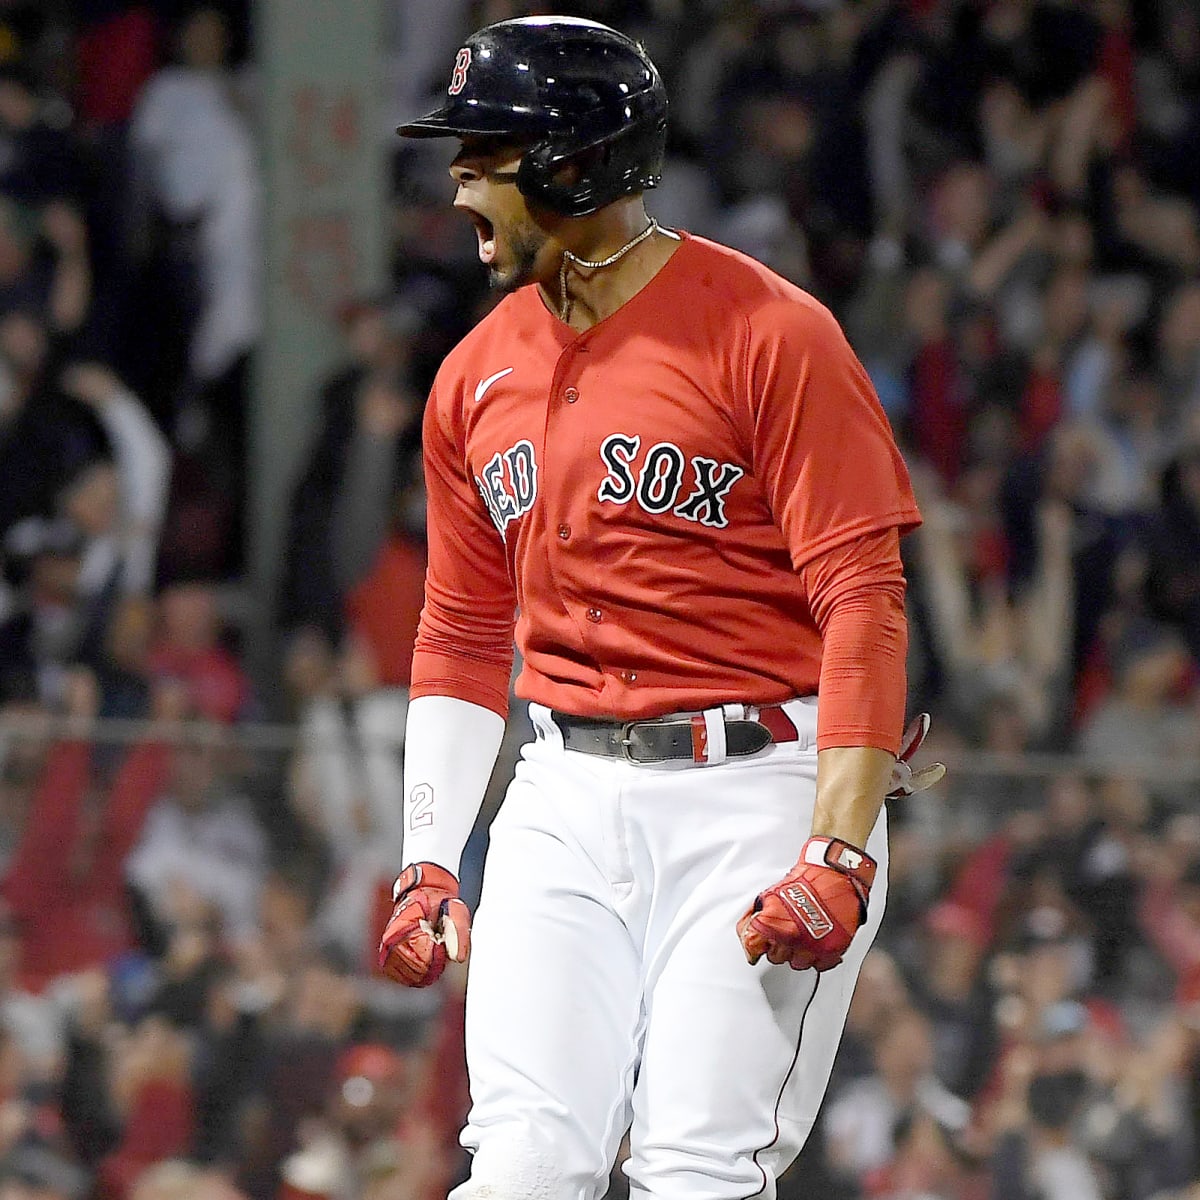 In baseball's best division, the Red Sox are a deserving last place team